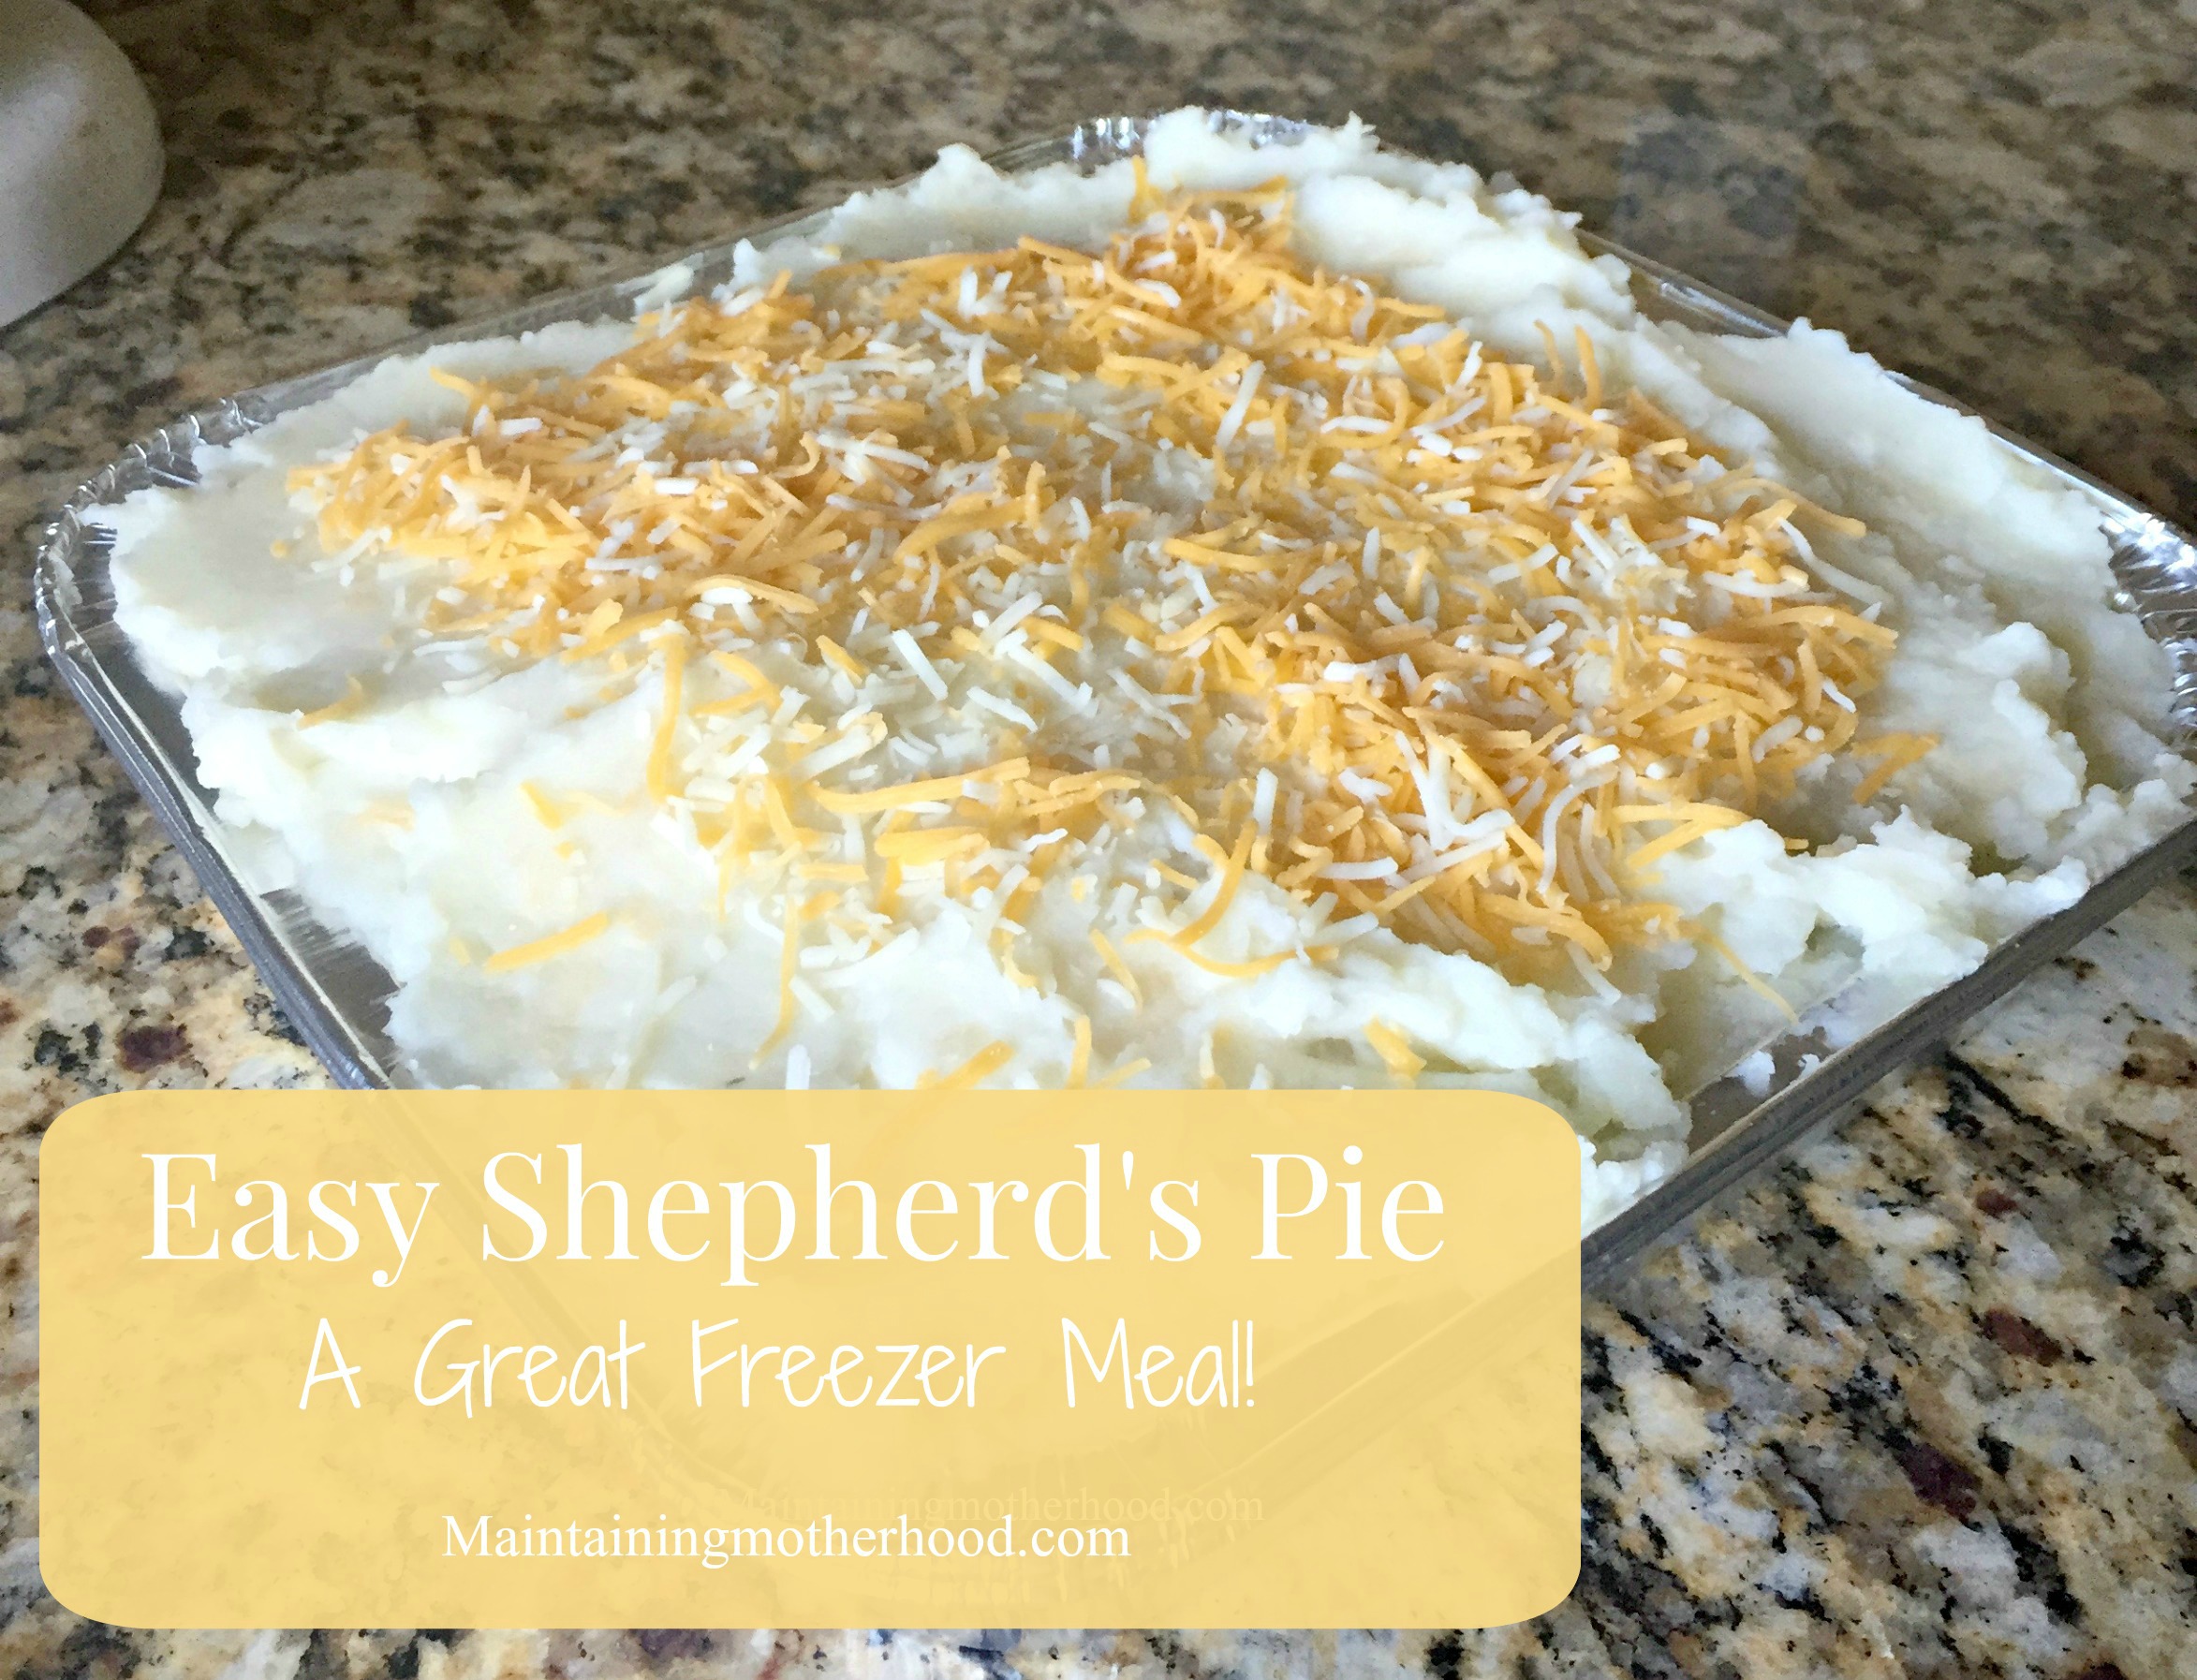 When you think of Shepherd's Pie, you probably think of ground beef, right? Try this easy shepherd's pie with roast! It makes a great freezer meal!